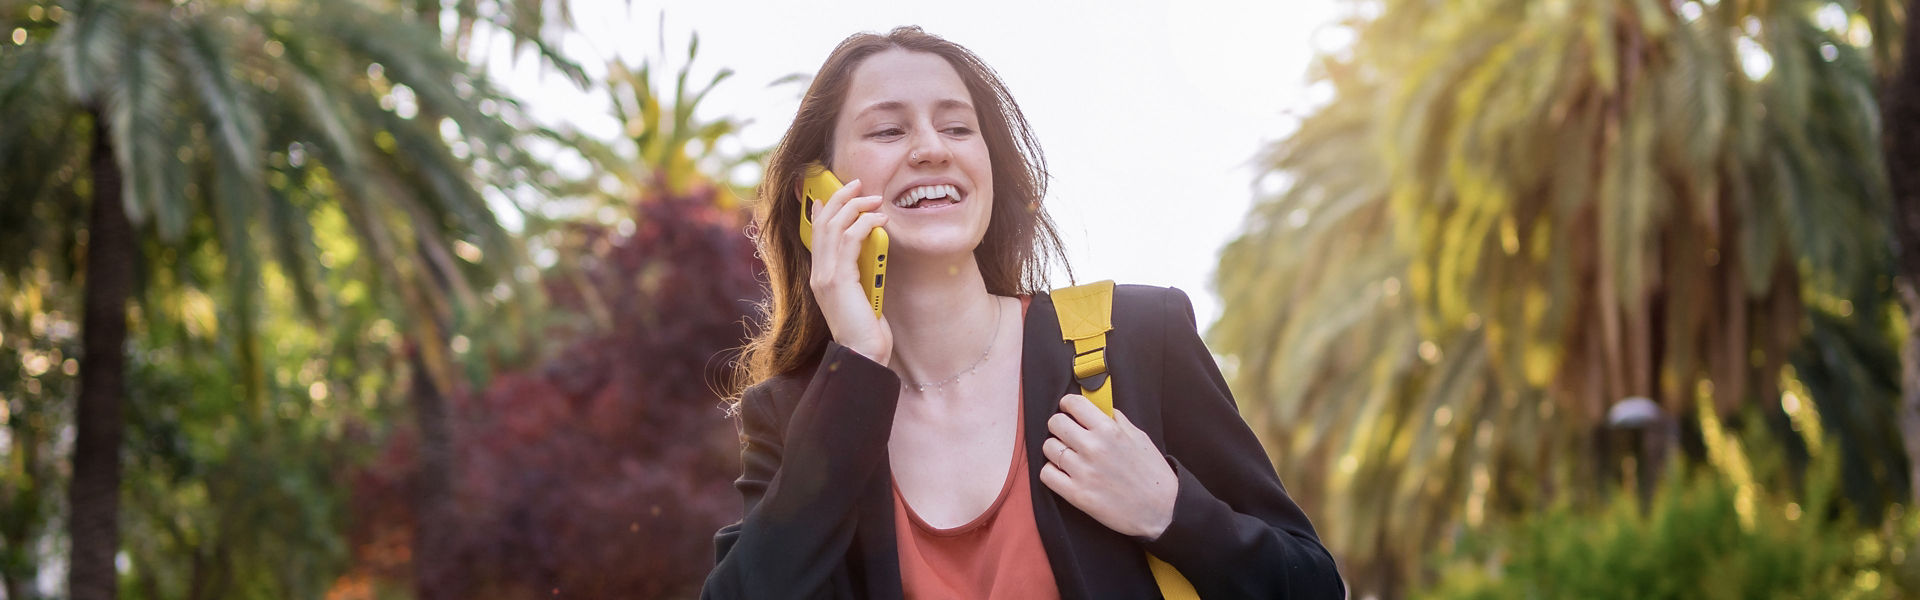 A woman smiling while talking on a mobile phone